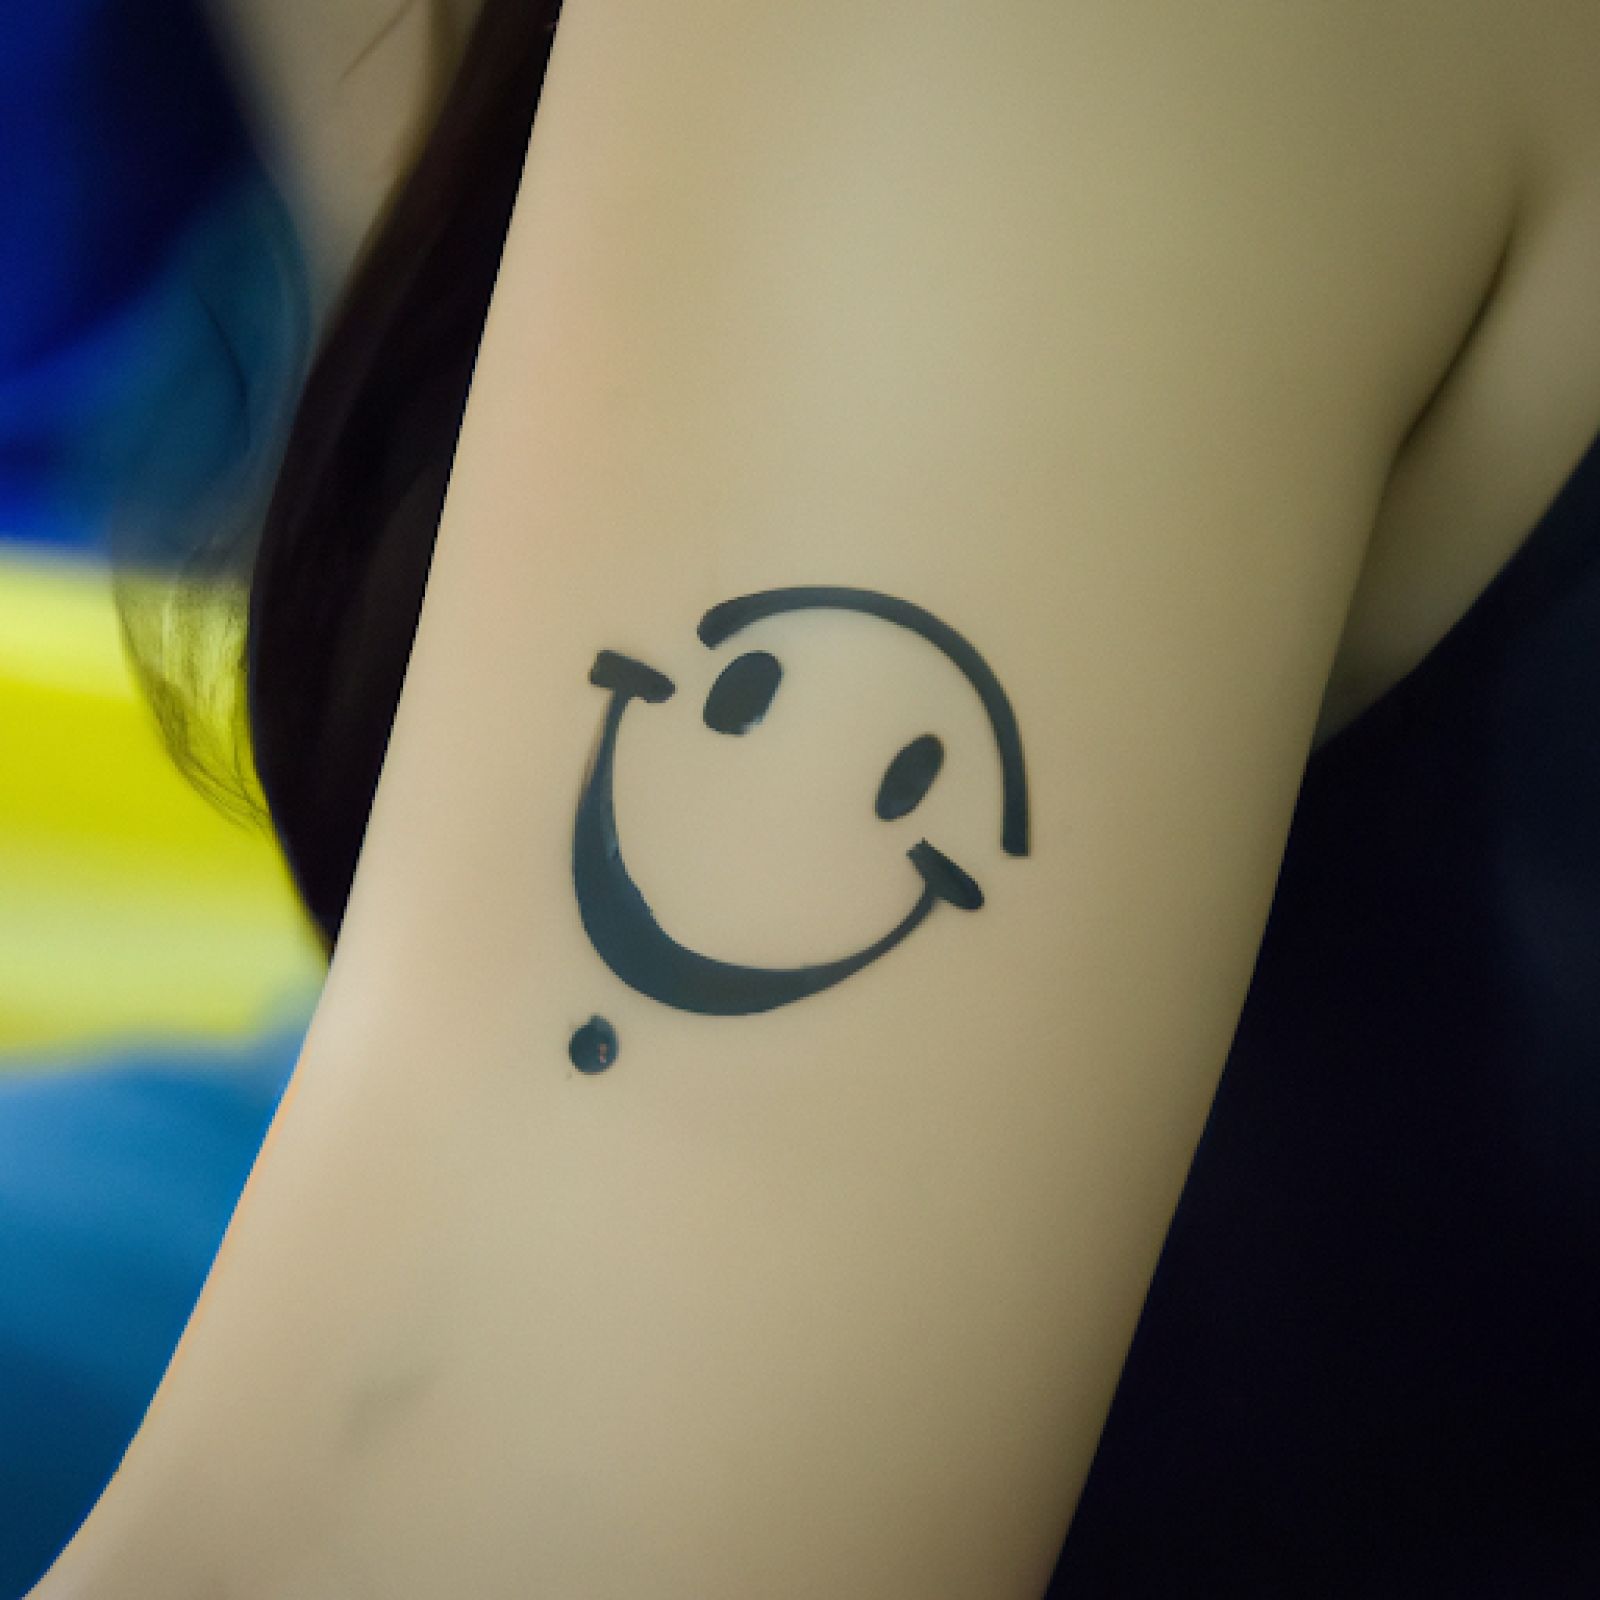 Smiley tattoo on forearm for women